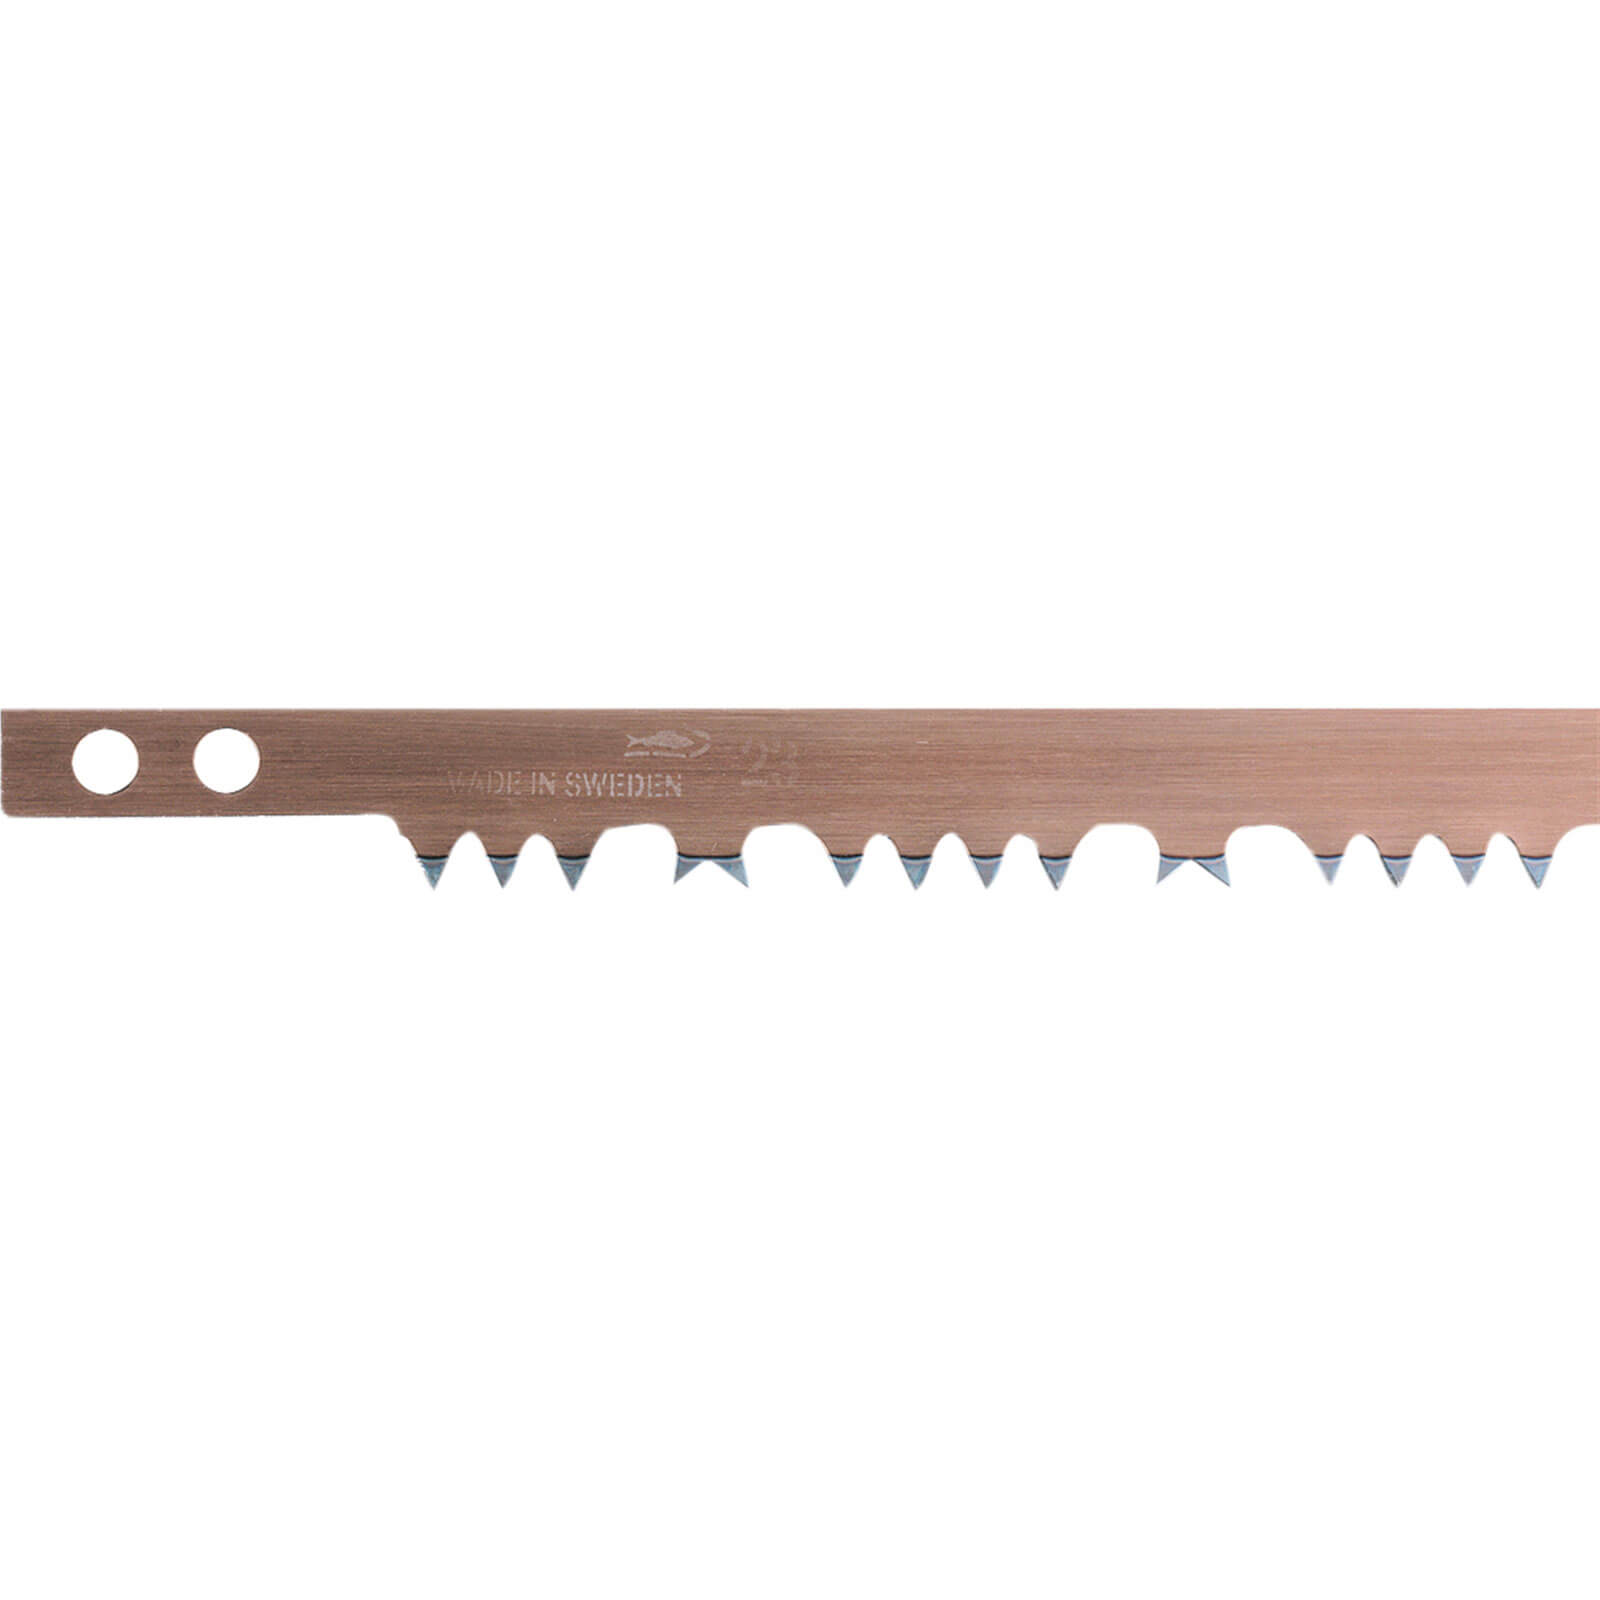 Bahco Raker Tooth Hard Point Bow Saw Blade 36&quot / 912mm For Green Wood